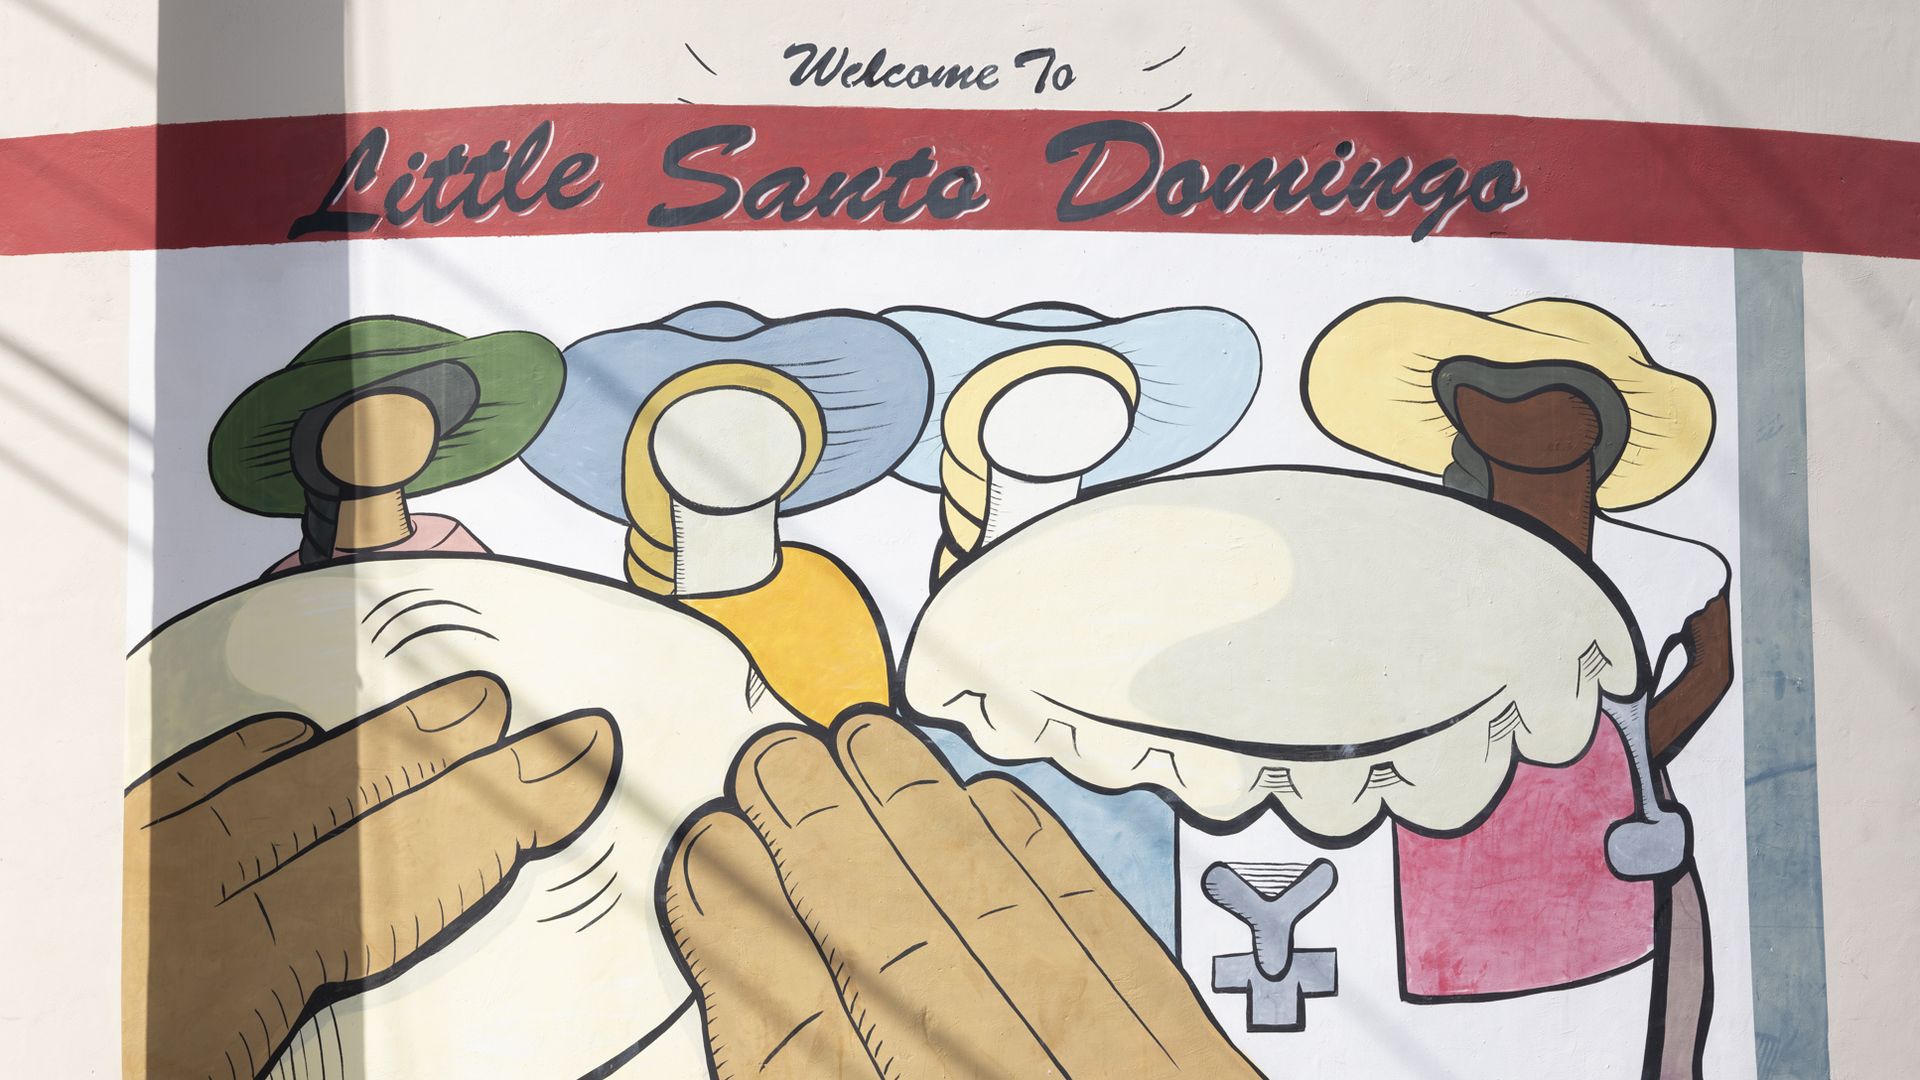 A mural in Allapattah says "Welcome to Little Santo Domingo."